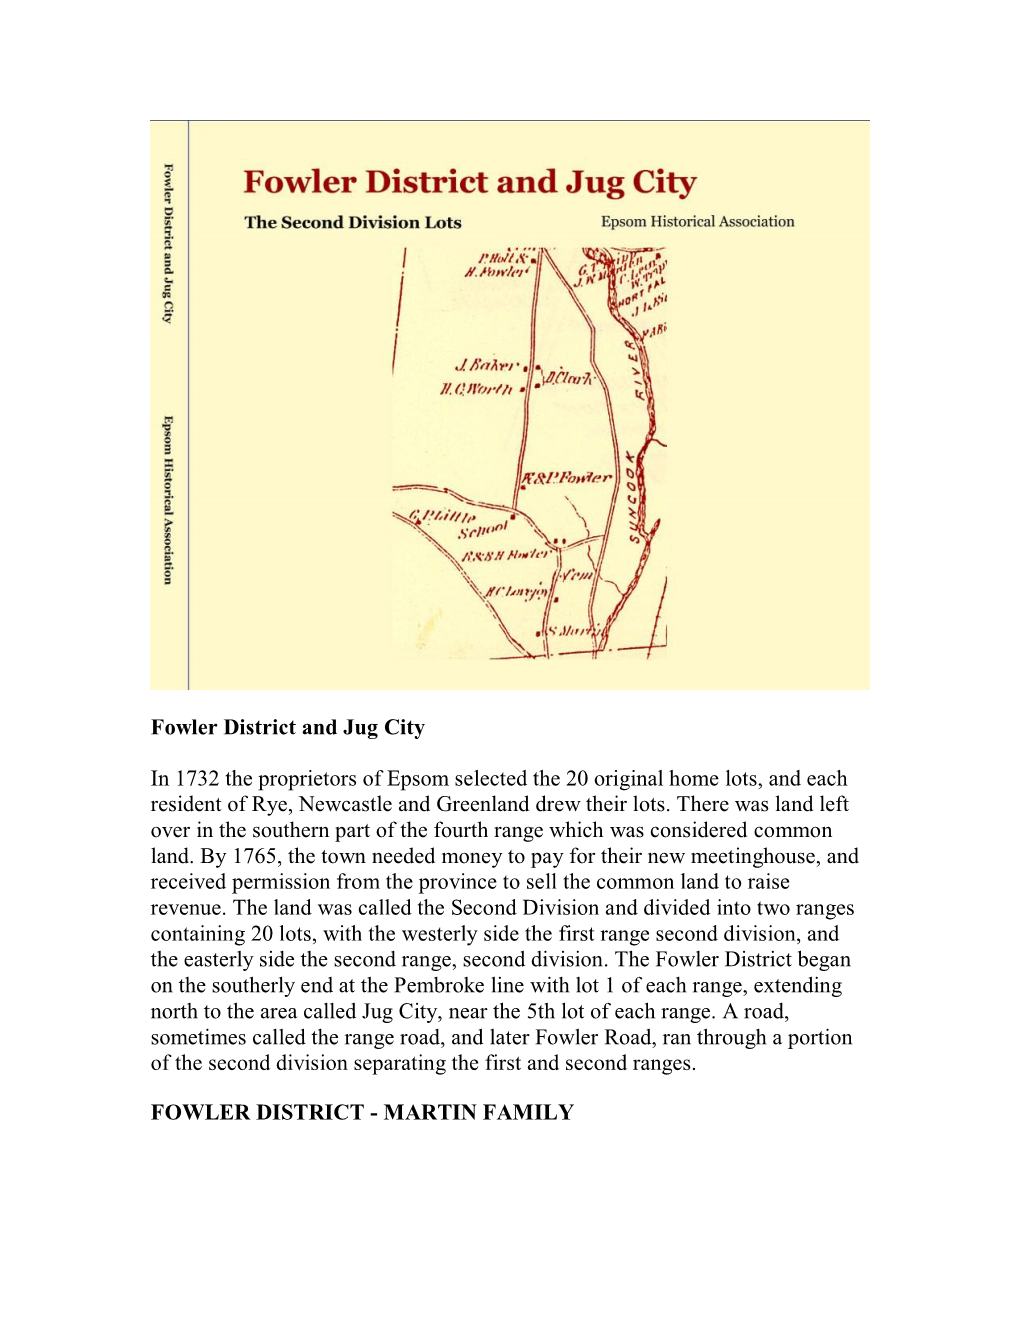 Fowler District and Jug City